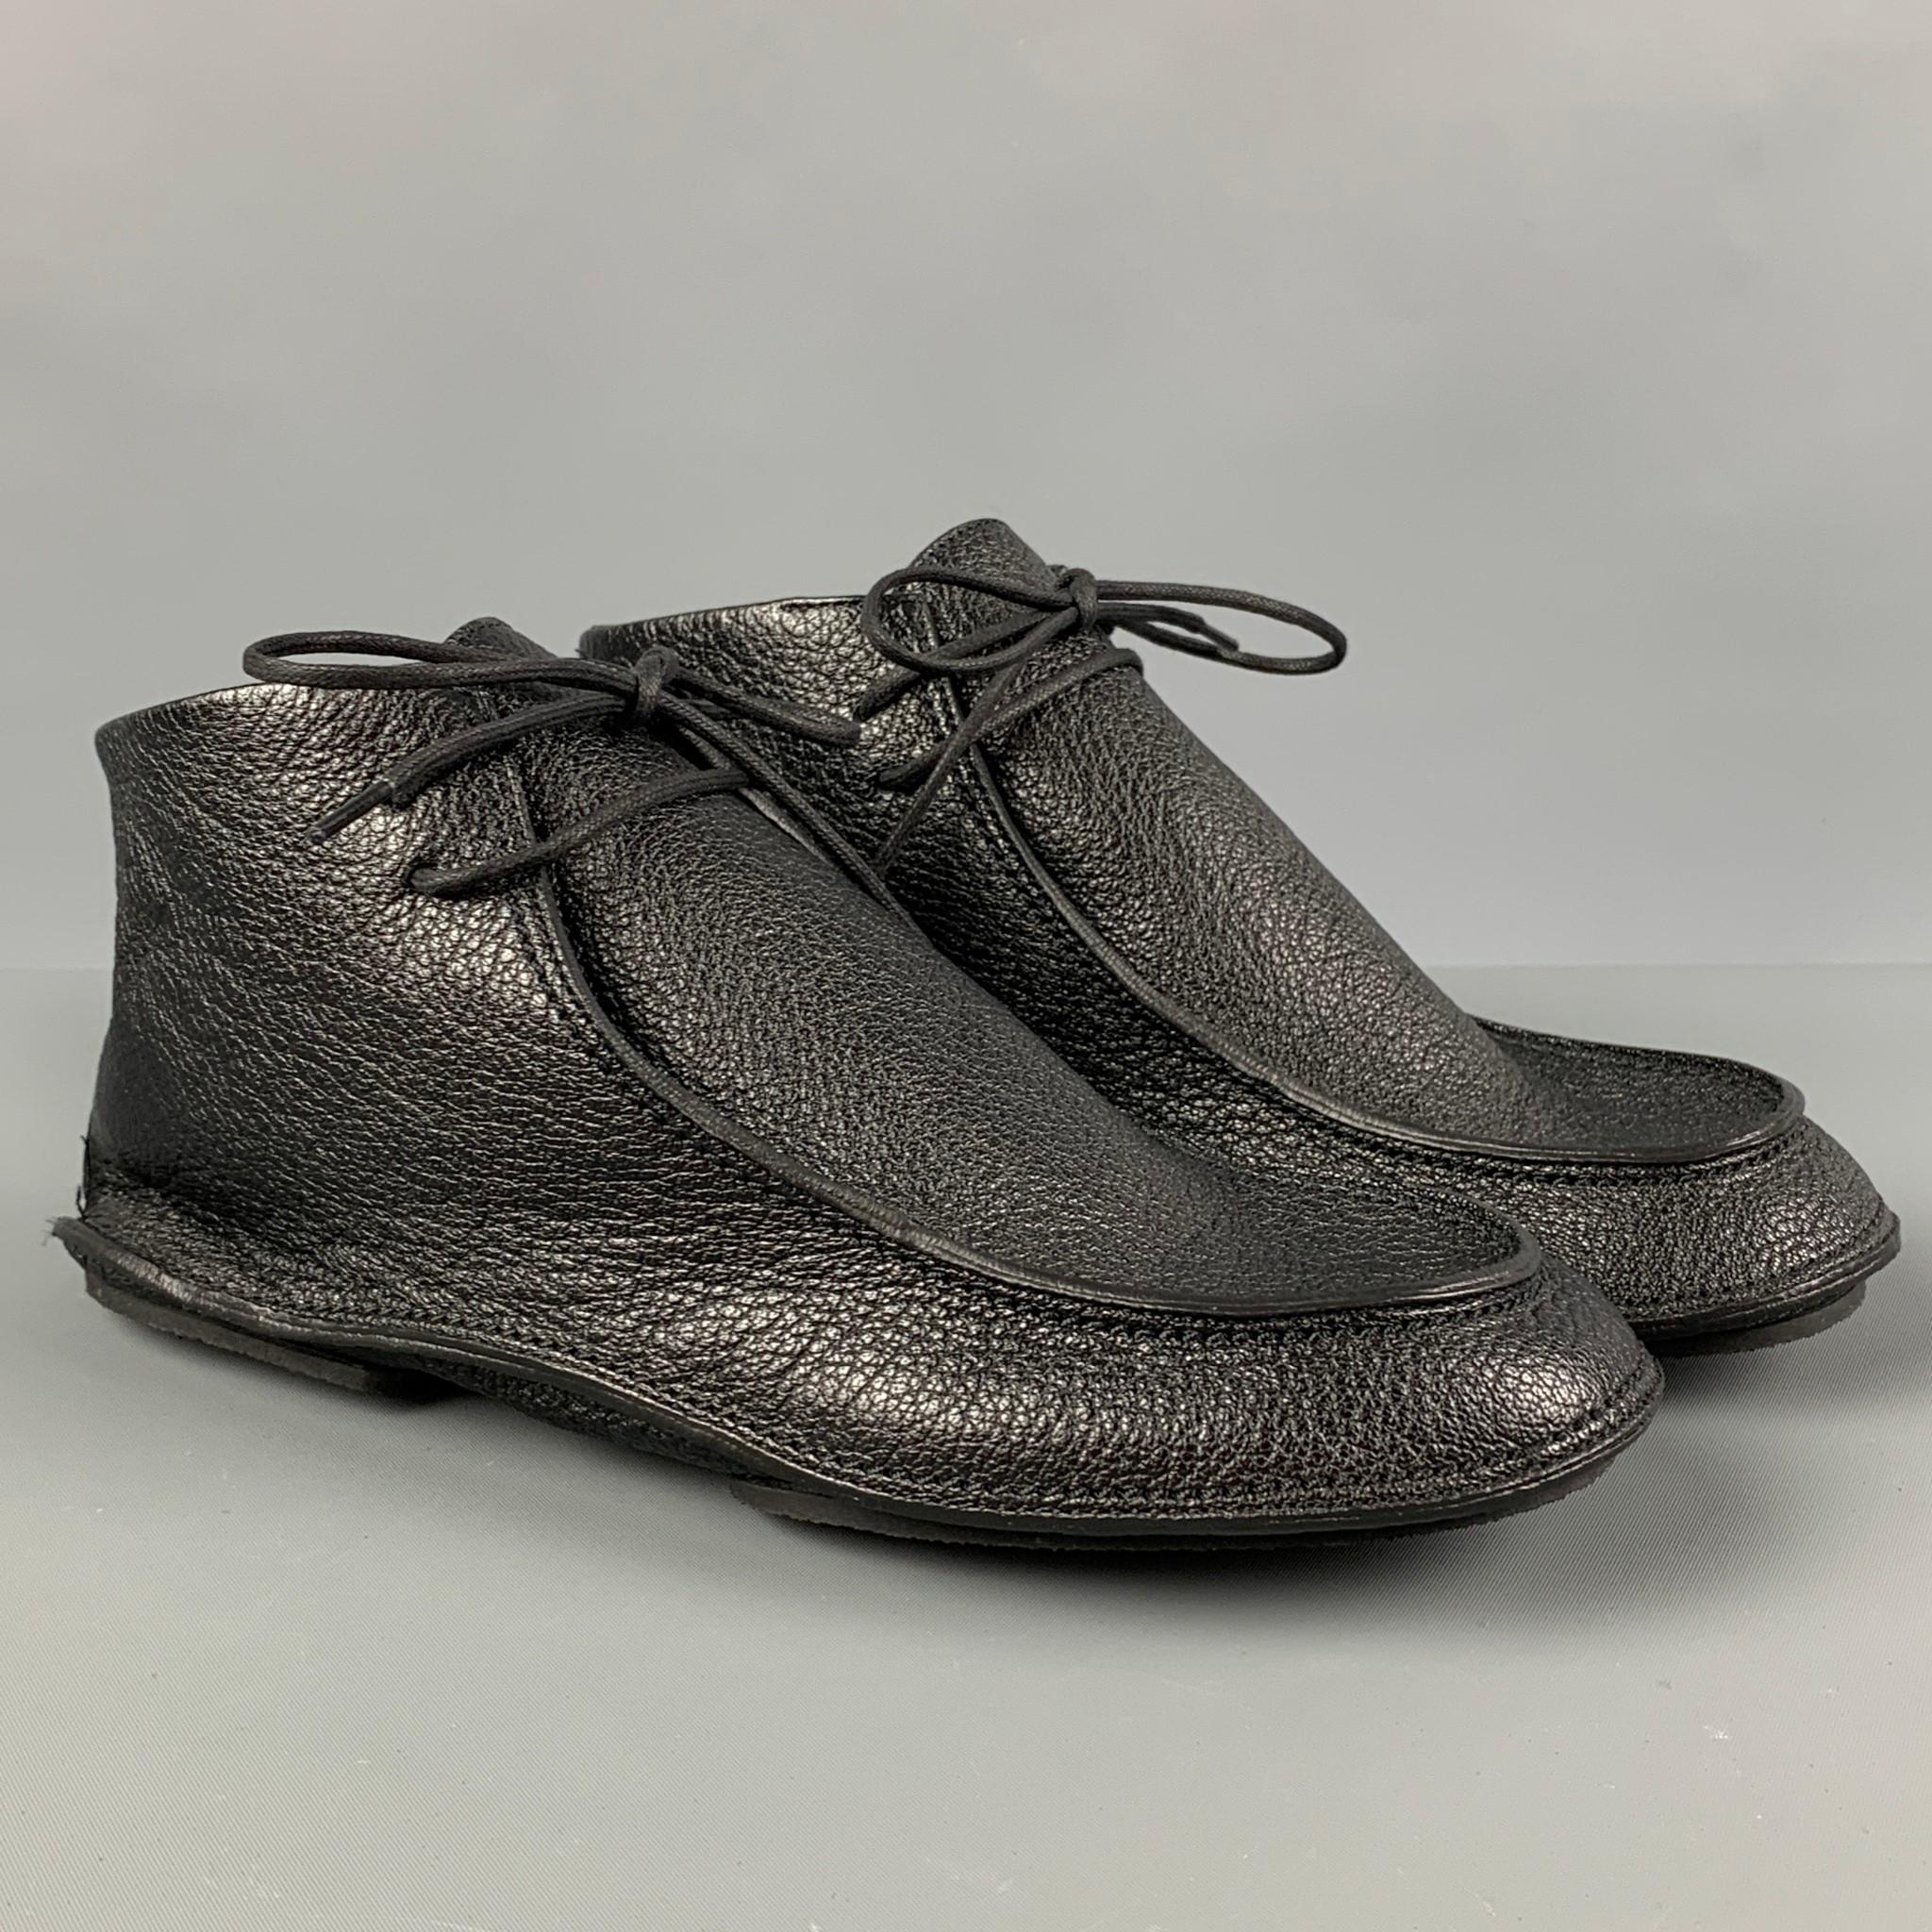 THE ROW moccasins comes in a black leather featuring a round toe and a lace up closure. Made in Italy. 

Very Good Pre-Owned Condition.
Marked: 37.5
Original Retail Price: $990.00

Outsole: 10.25 in. x 3.5 in. 